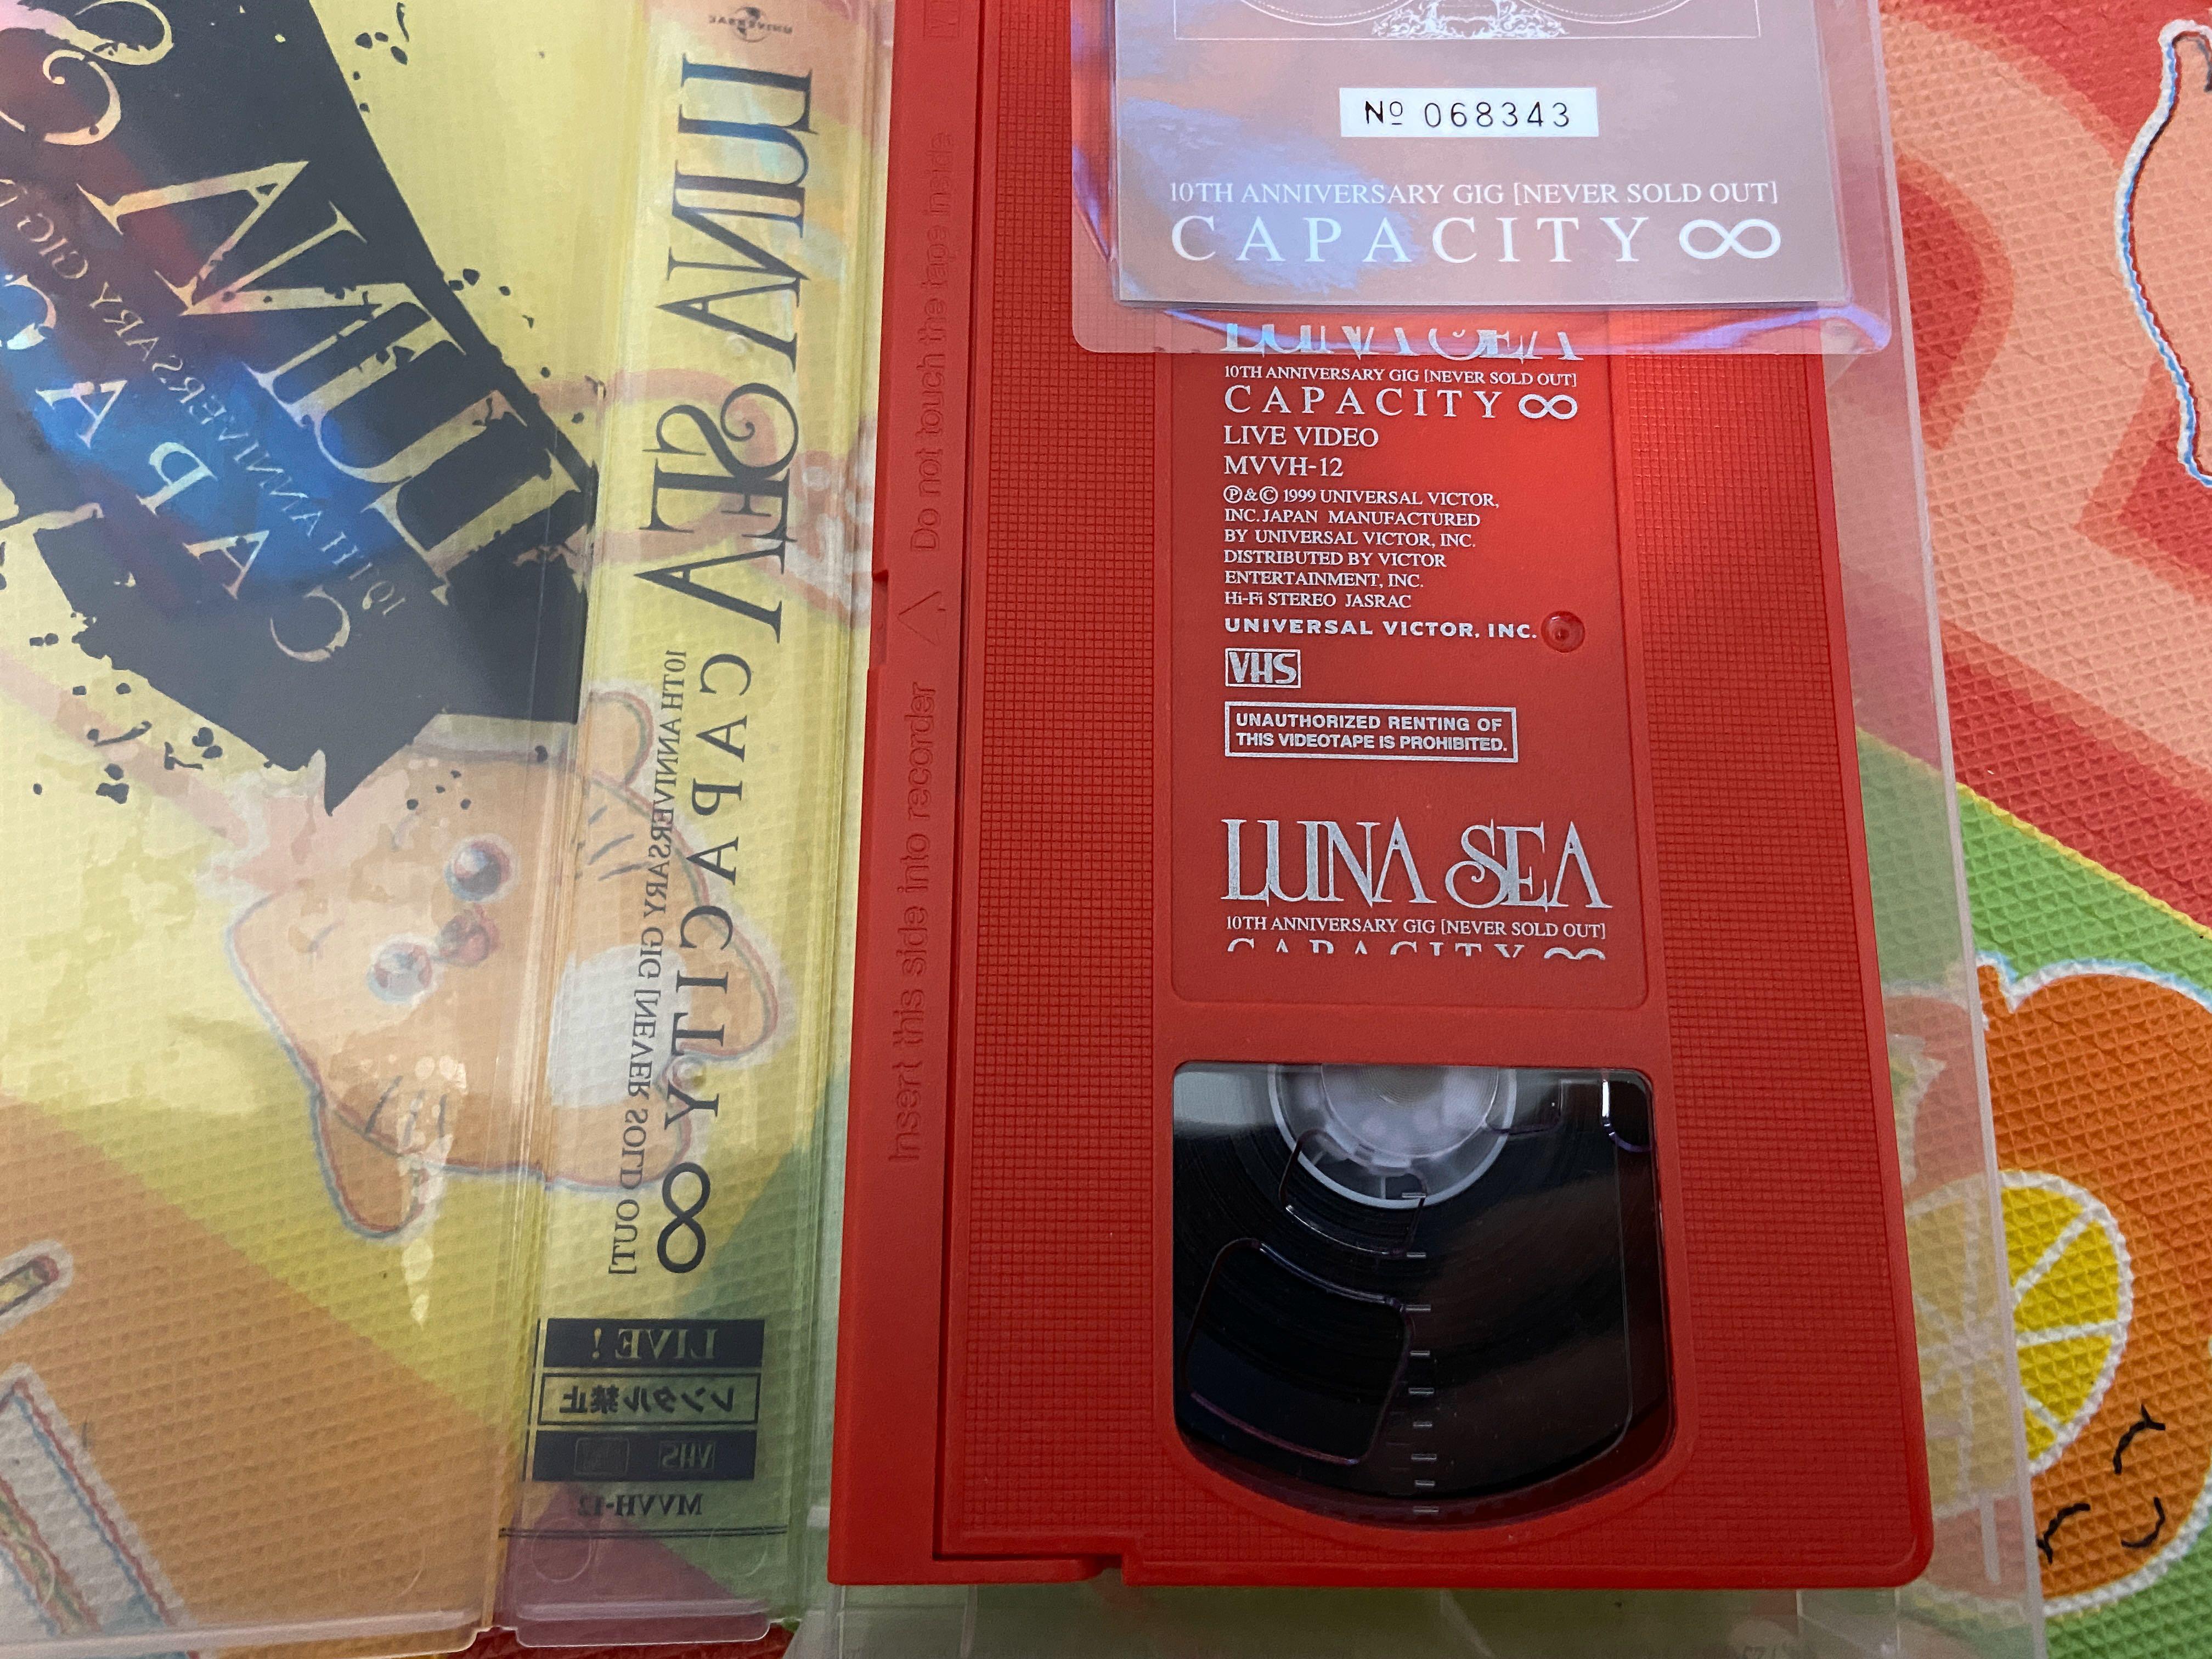 VHS Luna Sea 10th Anniversary Gig Never Sold Out, 興趣及遊戲, 收藏